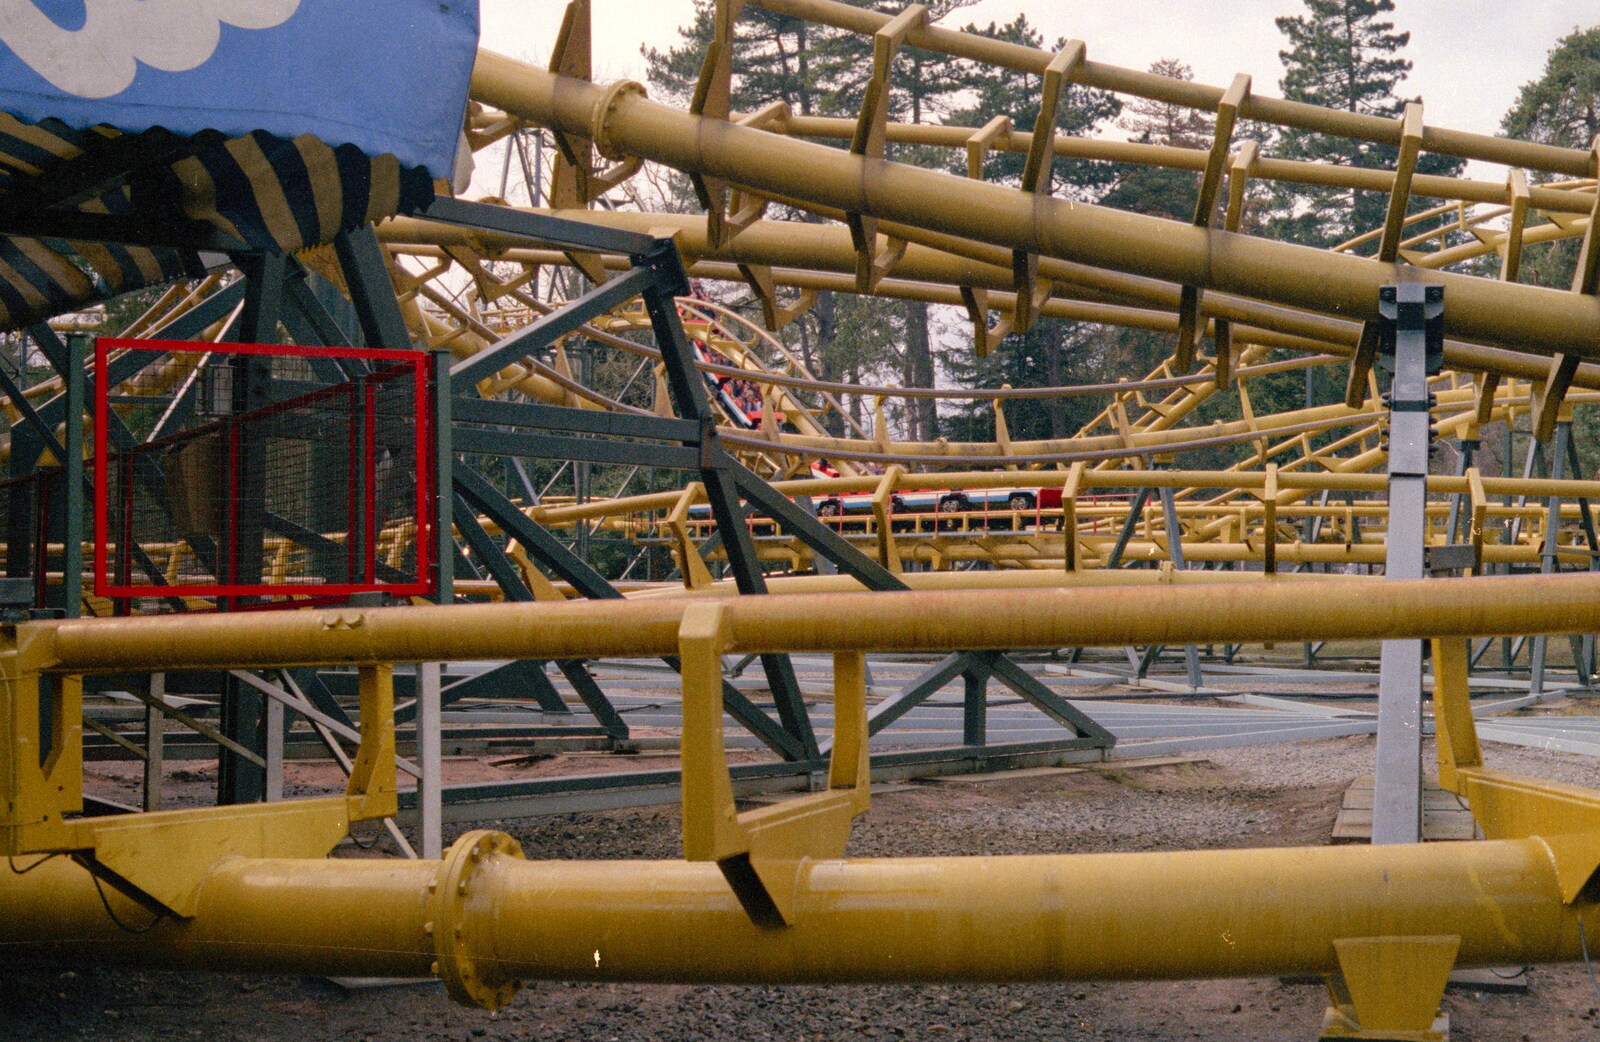 A tangle of tracks on the Corkscrew at Alton Towers from Easter With Sean in Macclesfield, Cheshire - 6th April 1986